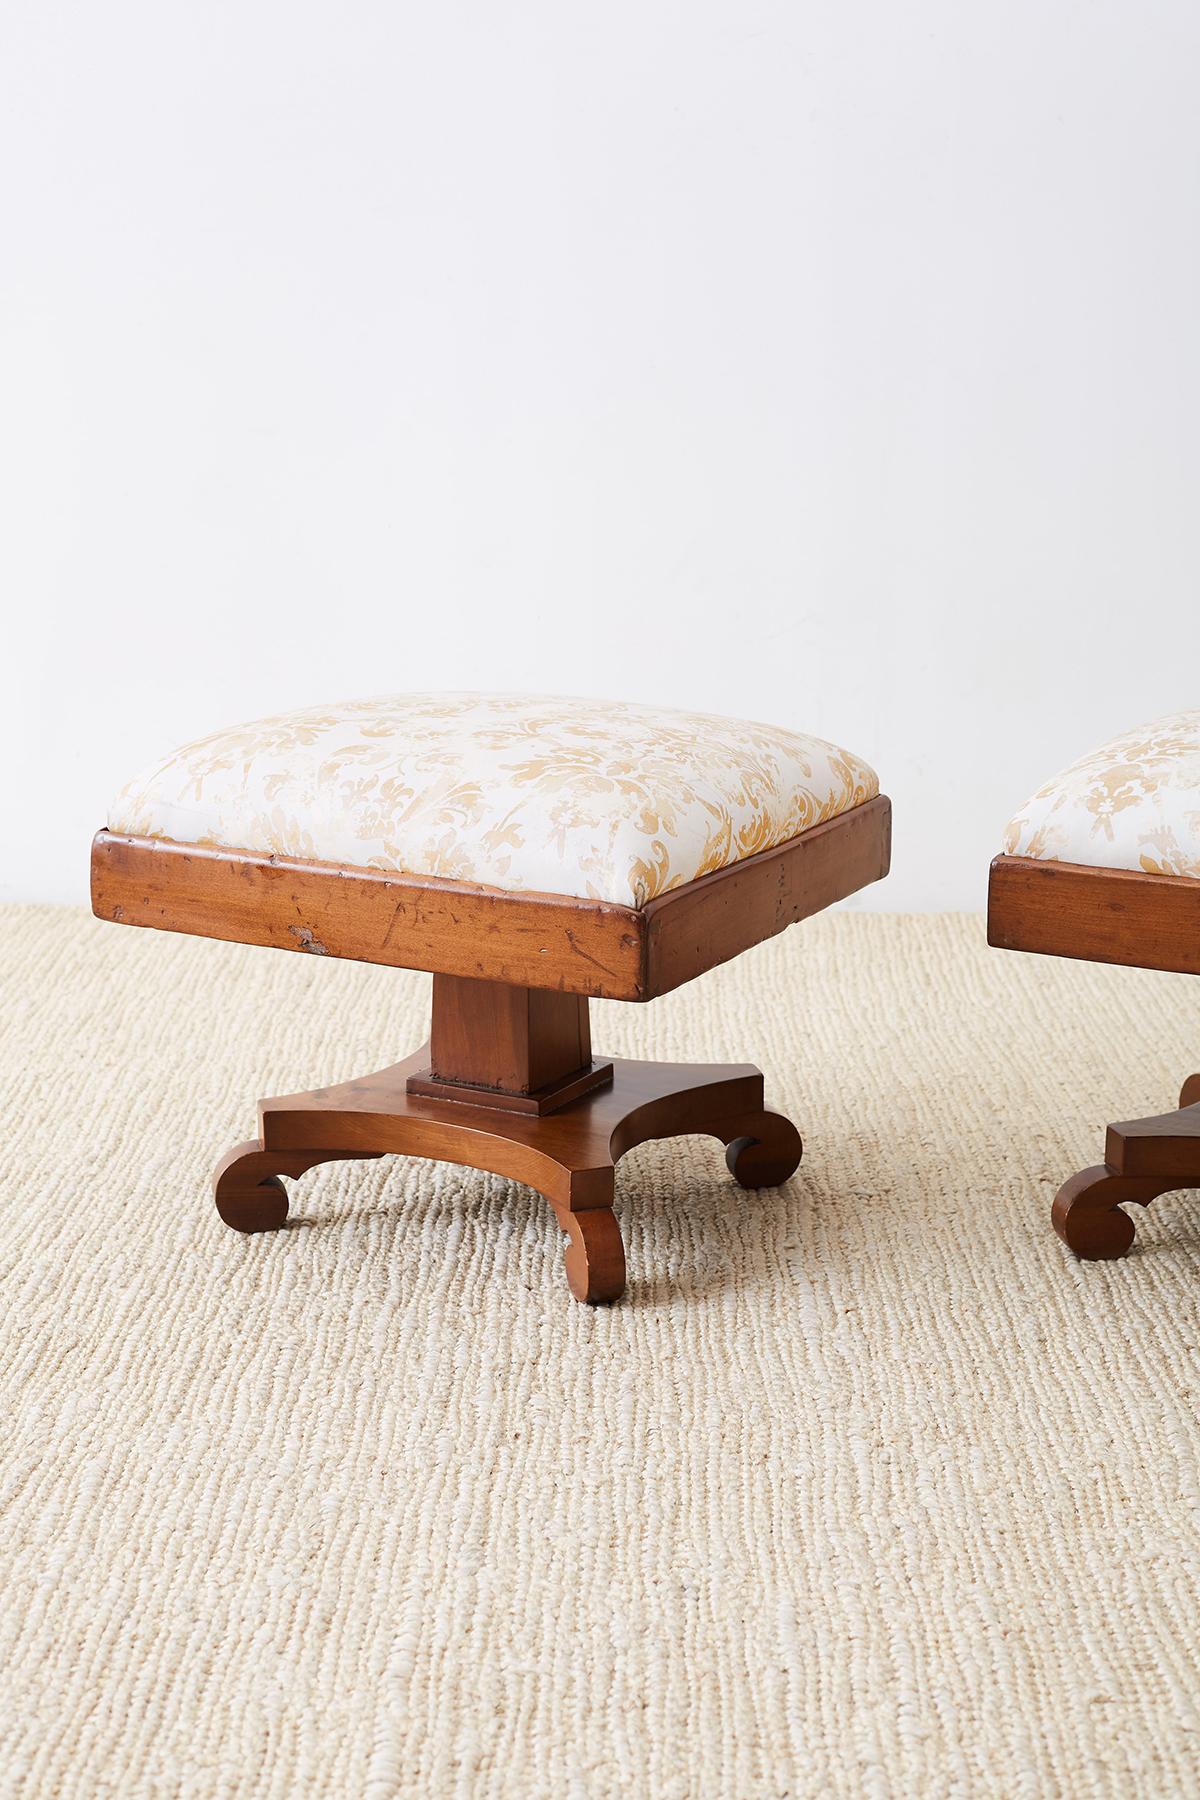 European Pair of Biedermeier Carved Footstools with Fortuny Upholstery